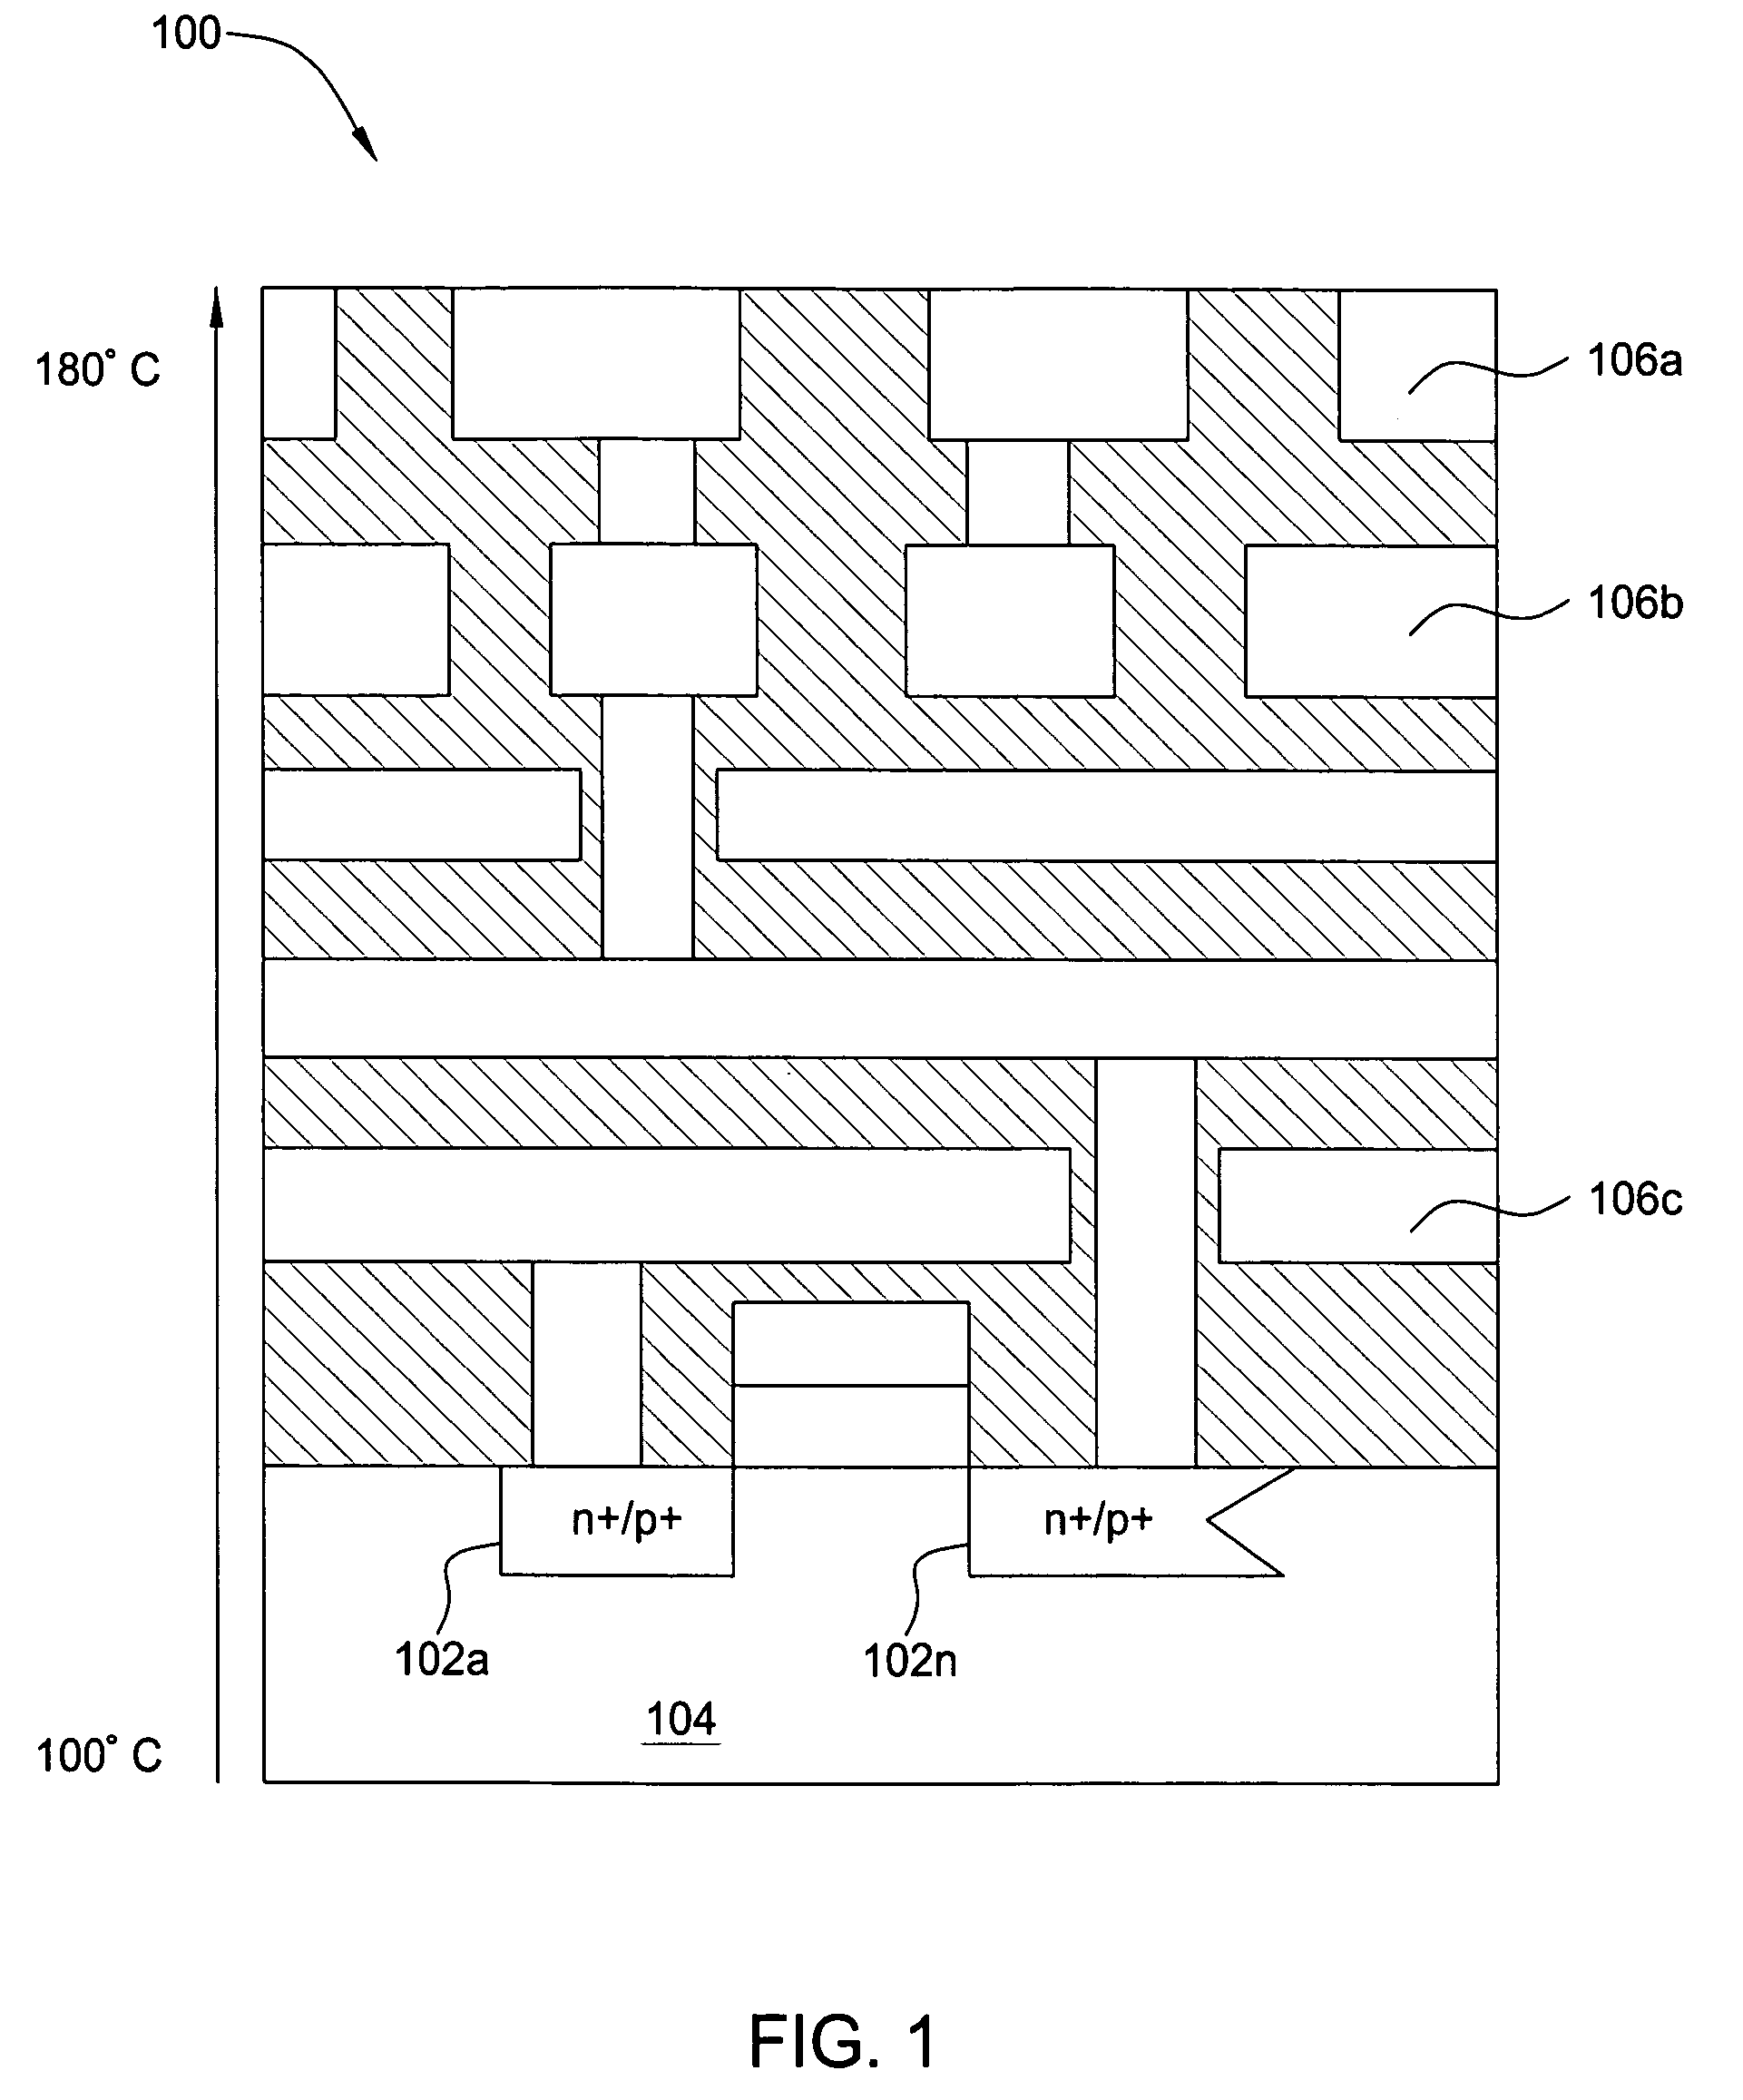 Method and apparatus for full-chip thermal analysis of semiconductor chip designs